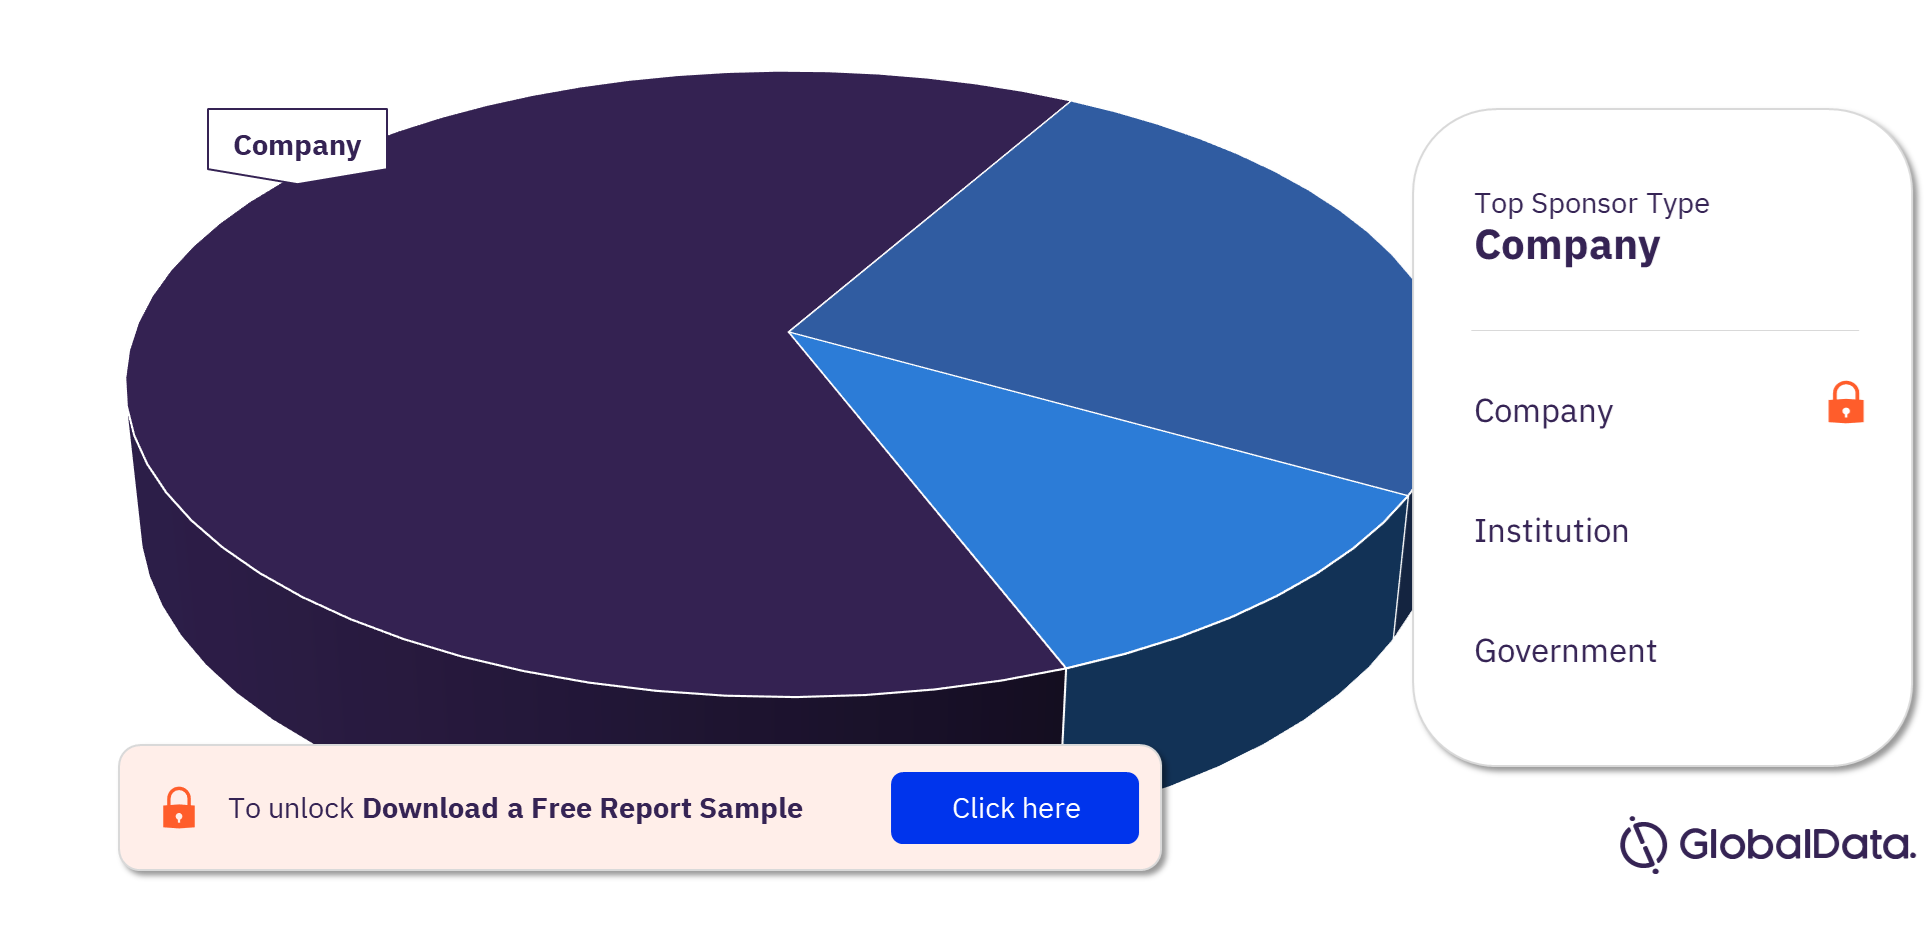 Cellulitis Clinical Trials Market Analysis by Sponsor Types, 2023 (%)